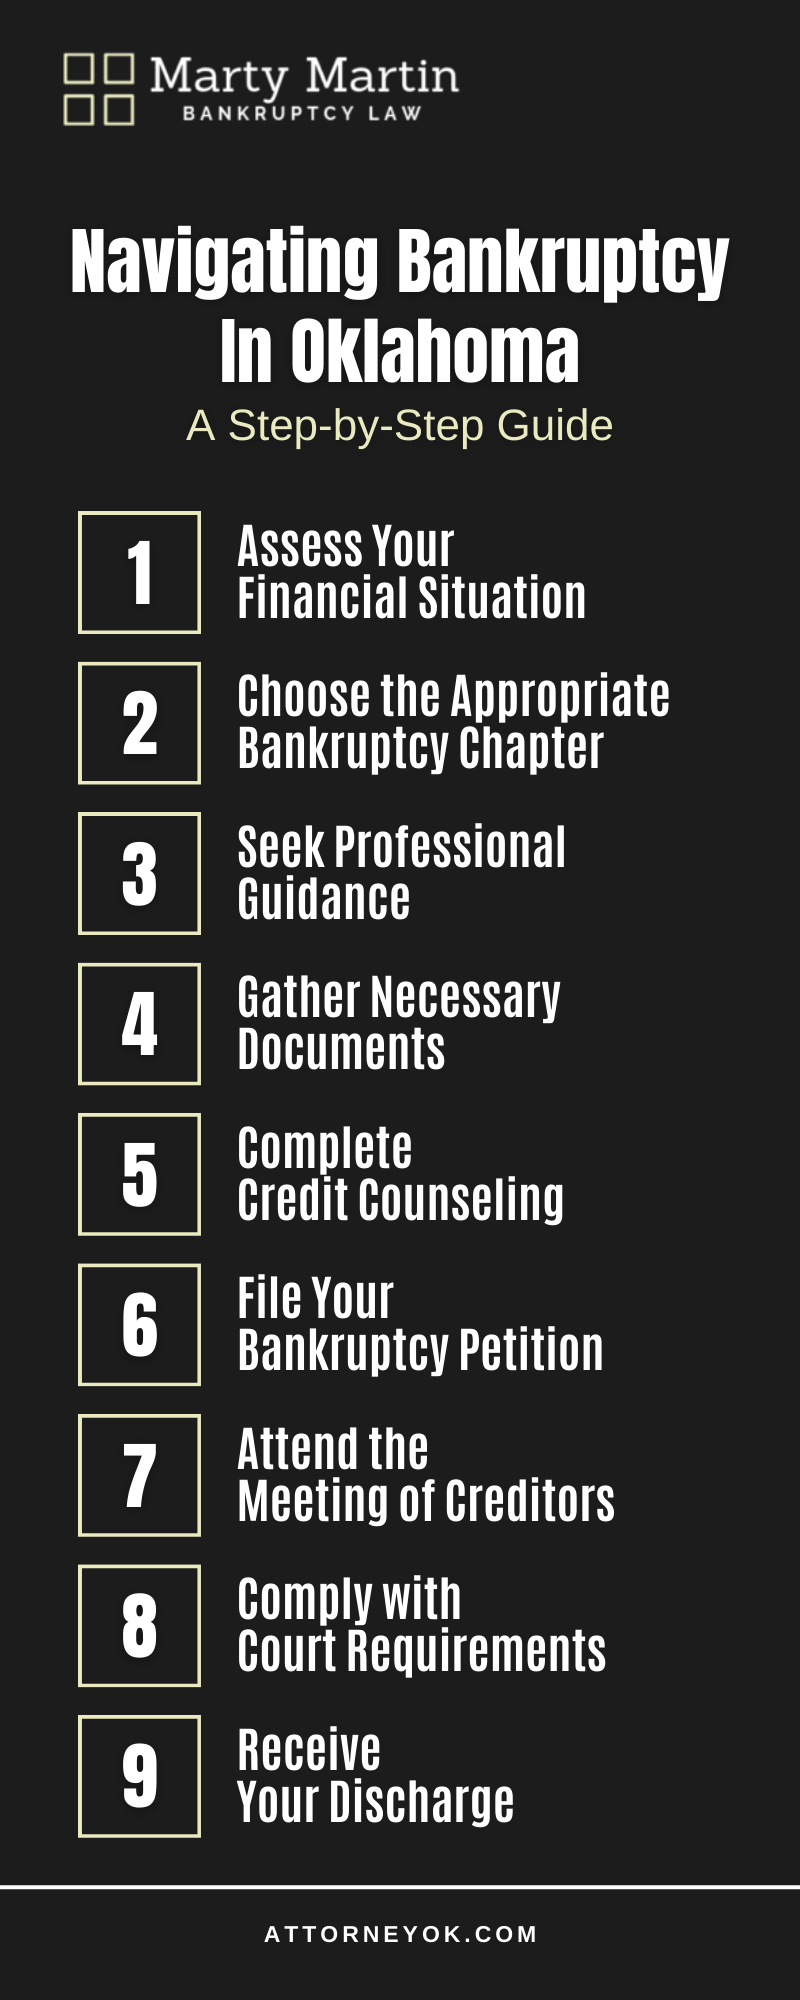 Navigating Bankruptcy In Oklahoma Infographic